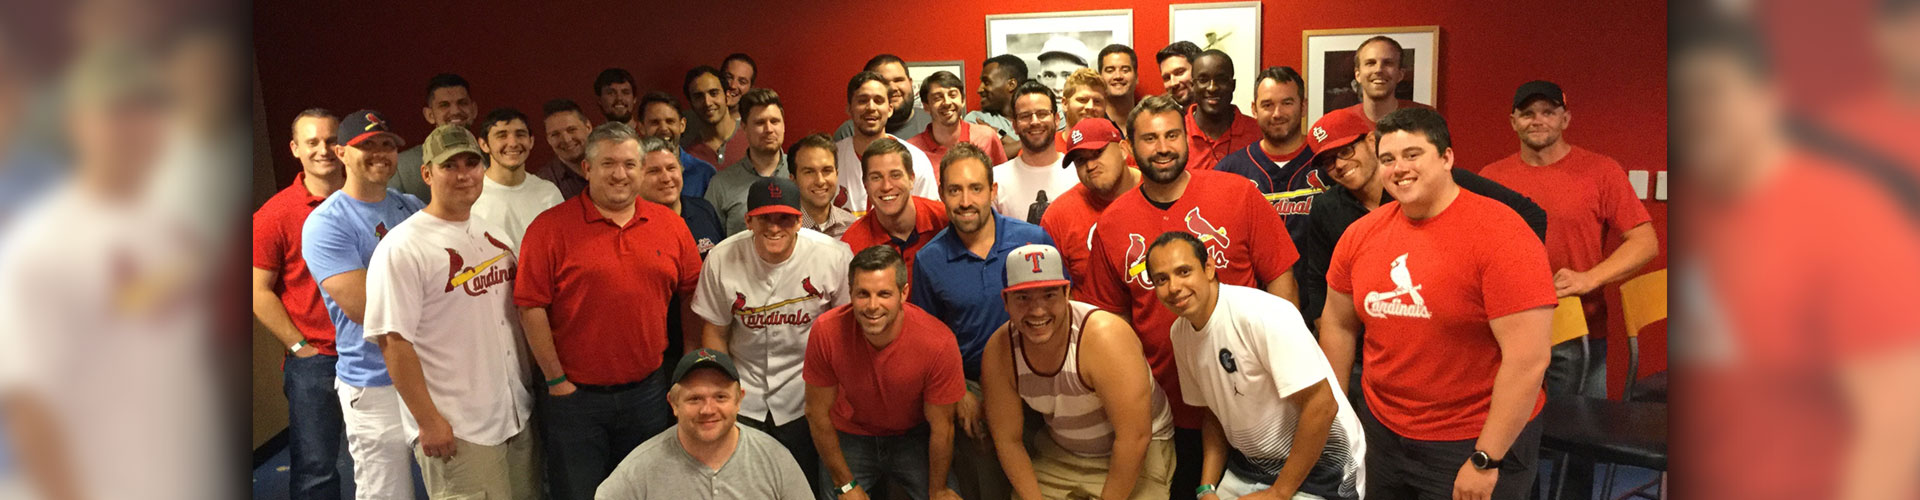 Legacy Builders group photo at a cardinals game